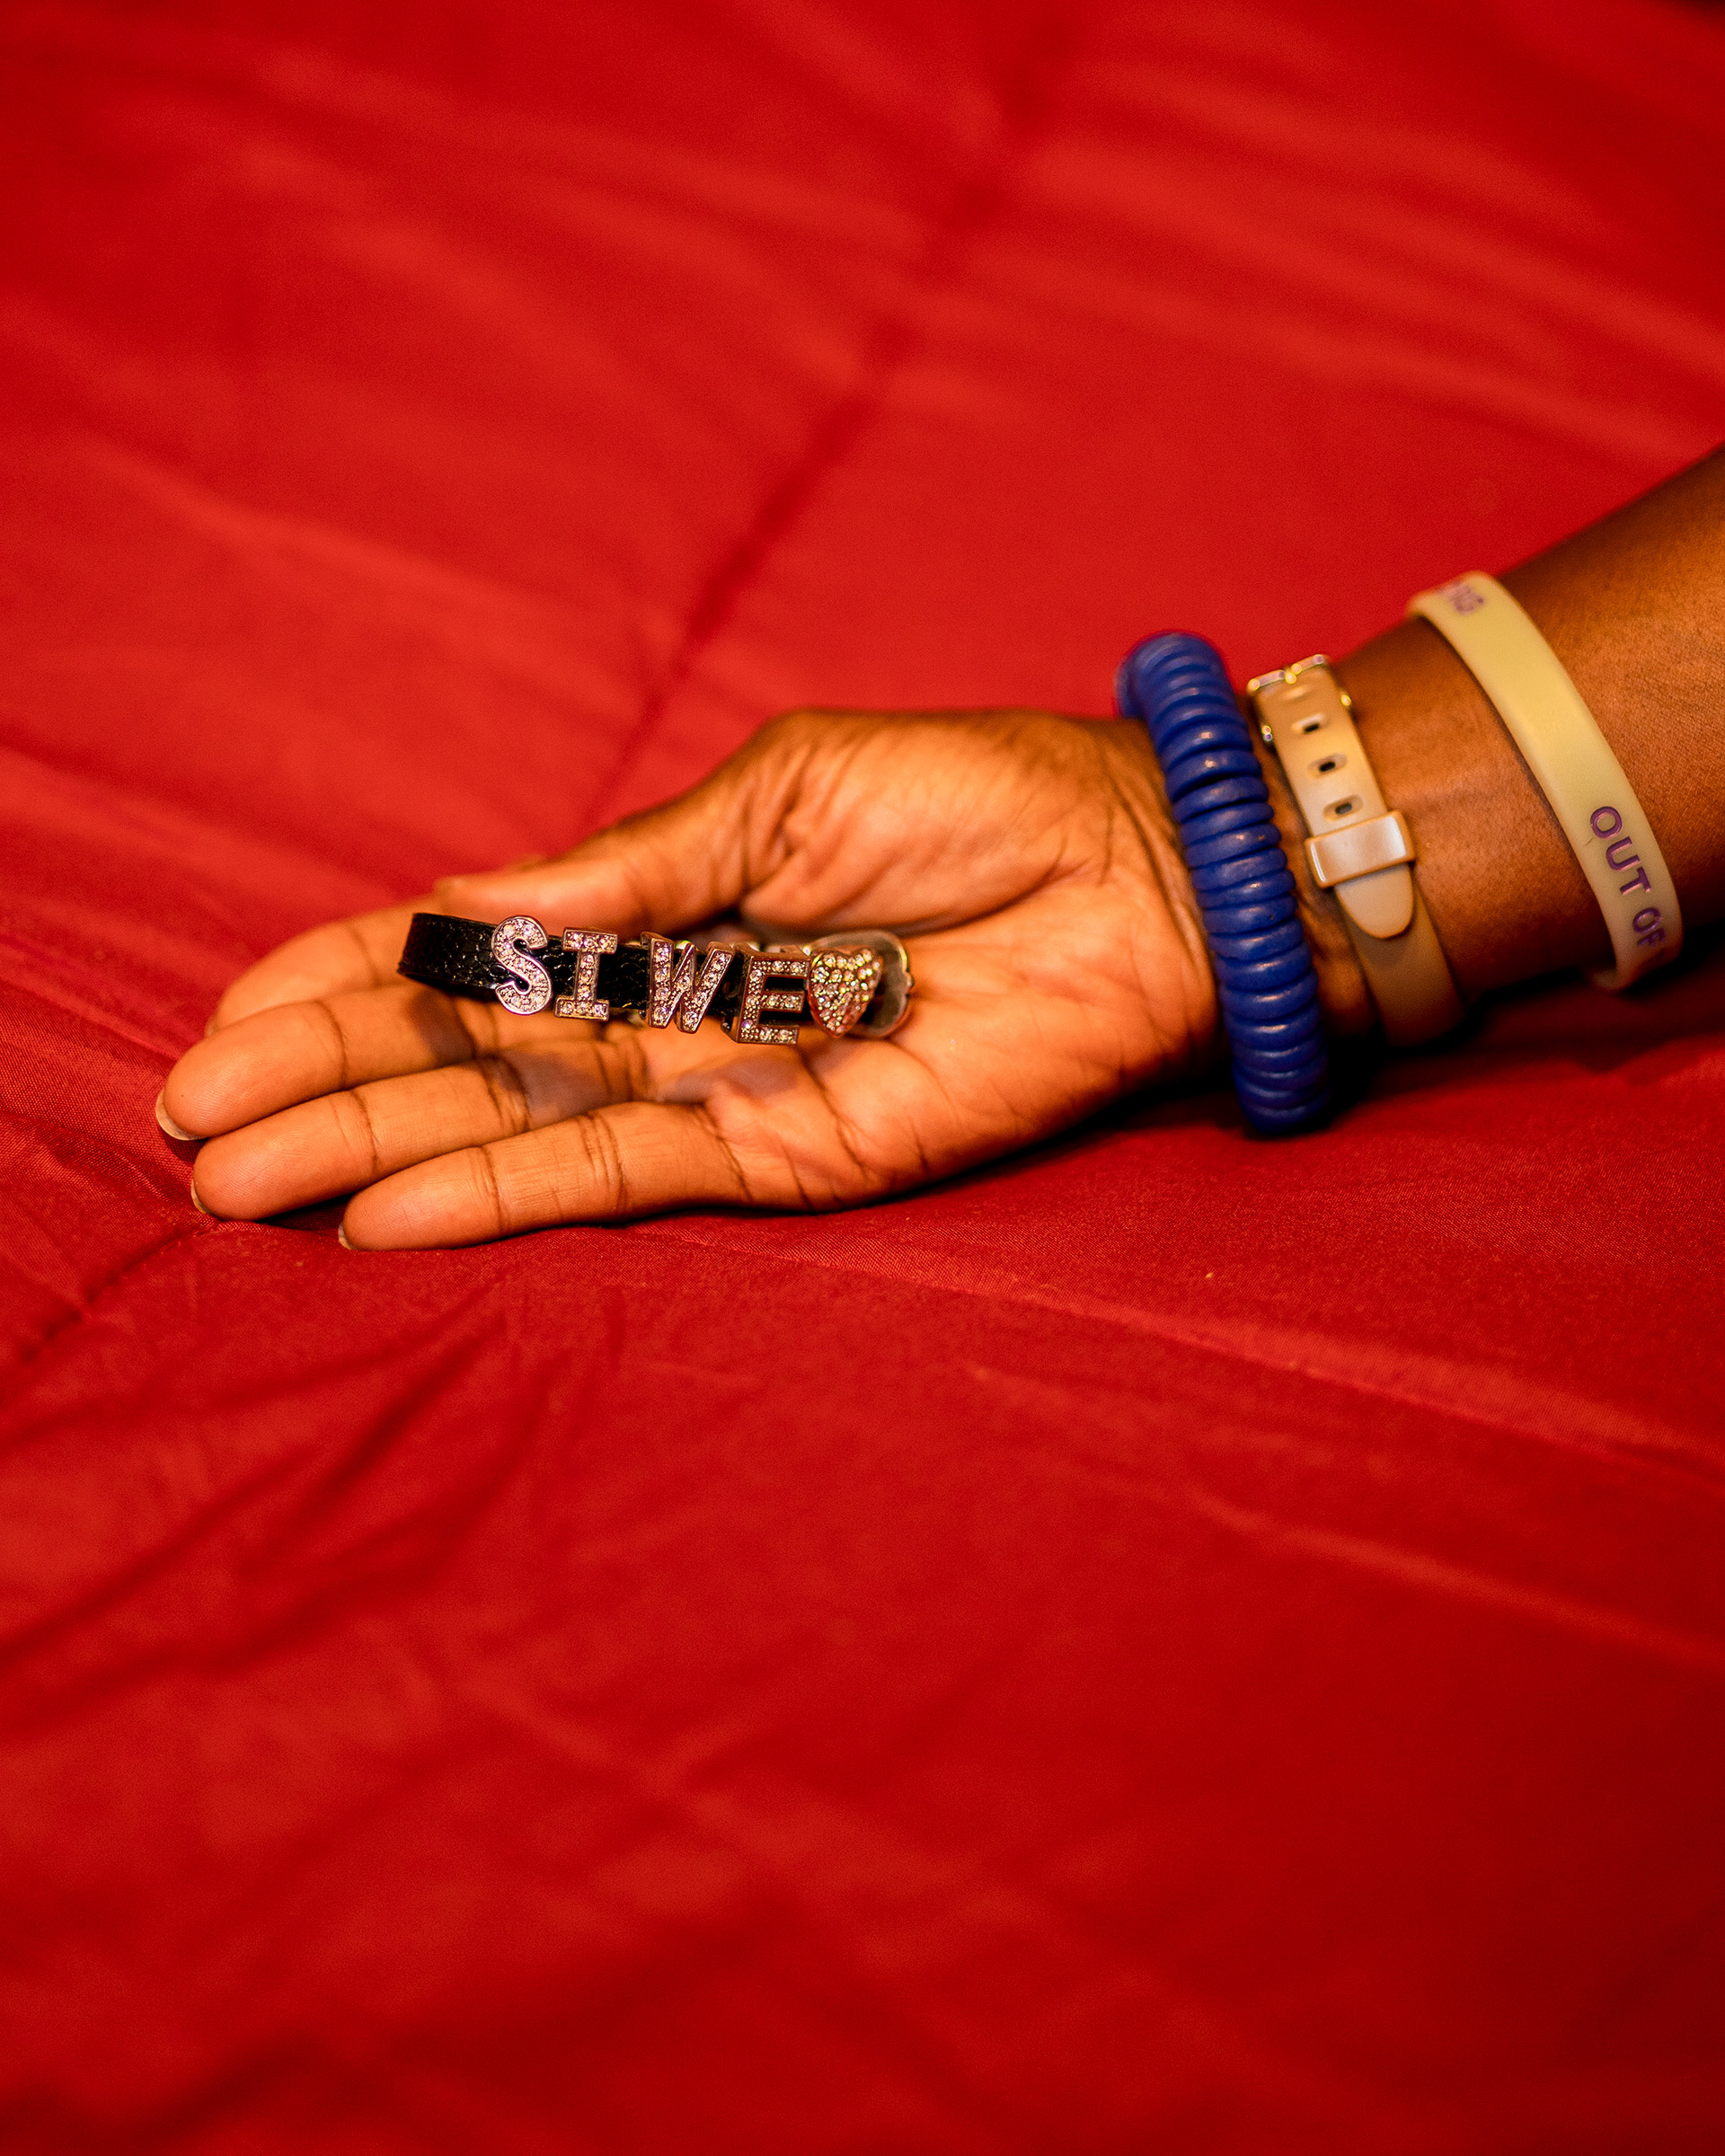 Dionne Monsanto holds a bracelet that Siwe made. “With a name like Busisiwe Ayo Monsanto...she could never buy anything pre-made with her name. So it was a big deal that there was a place that she could do that,” Monsanto says.